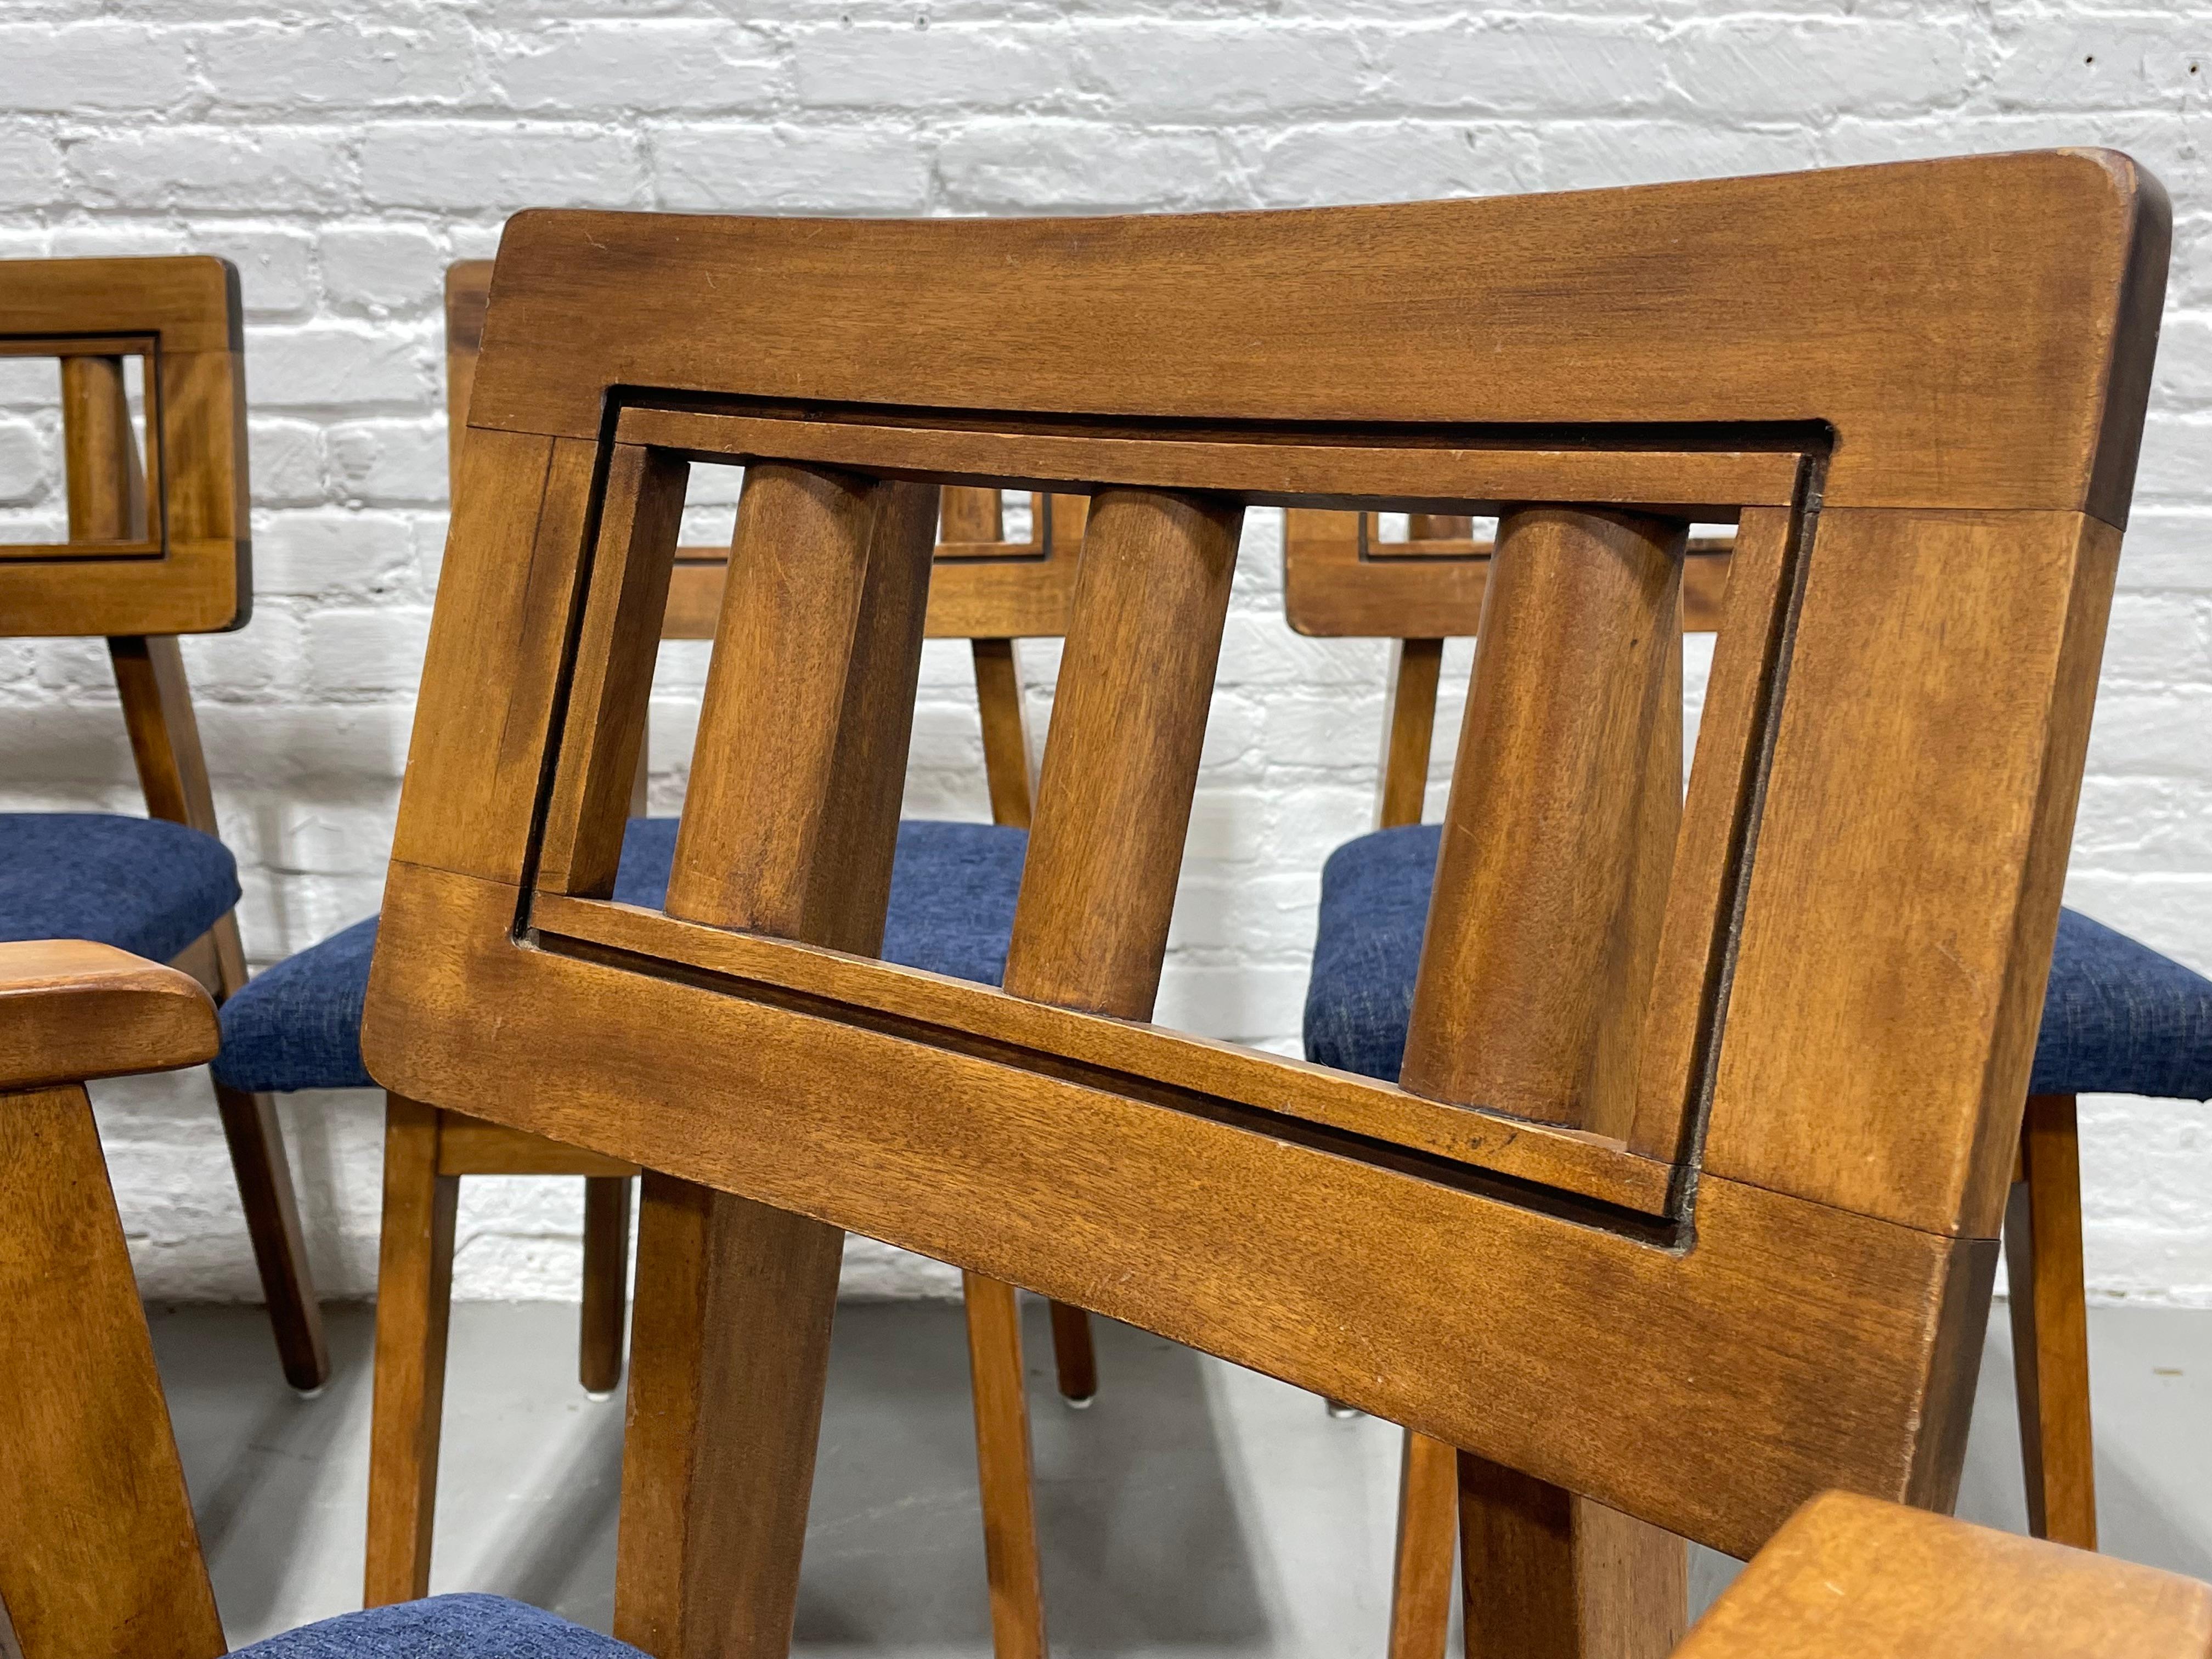 Mid-20th Century Mid-Century Modern Walnut Dining Chairs + New Denim Upholstery, Set/6 For Sale